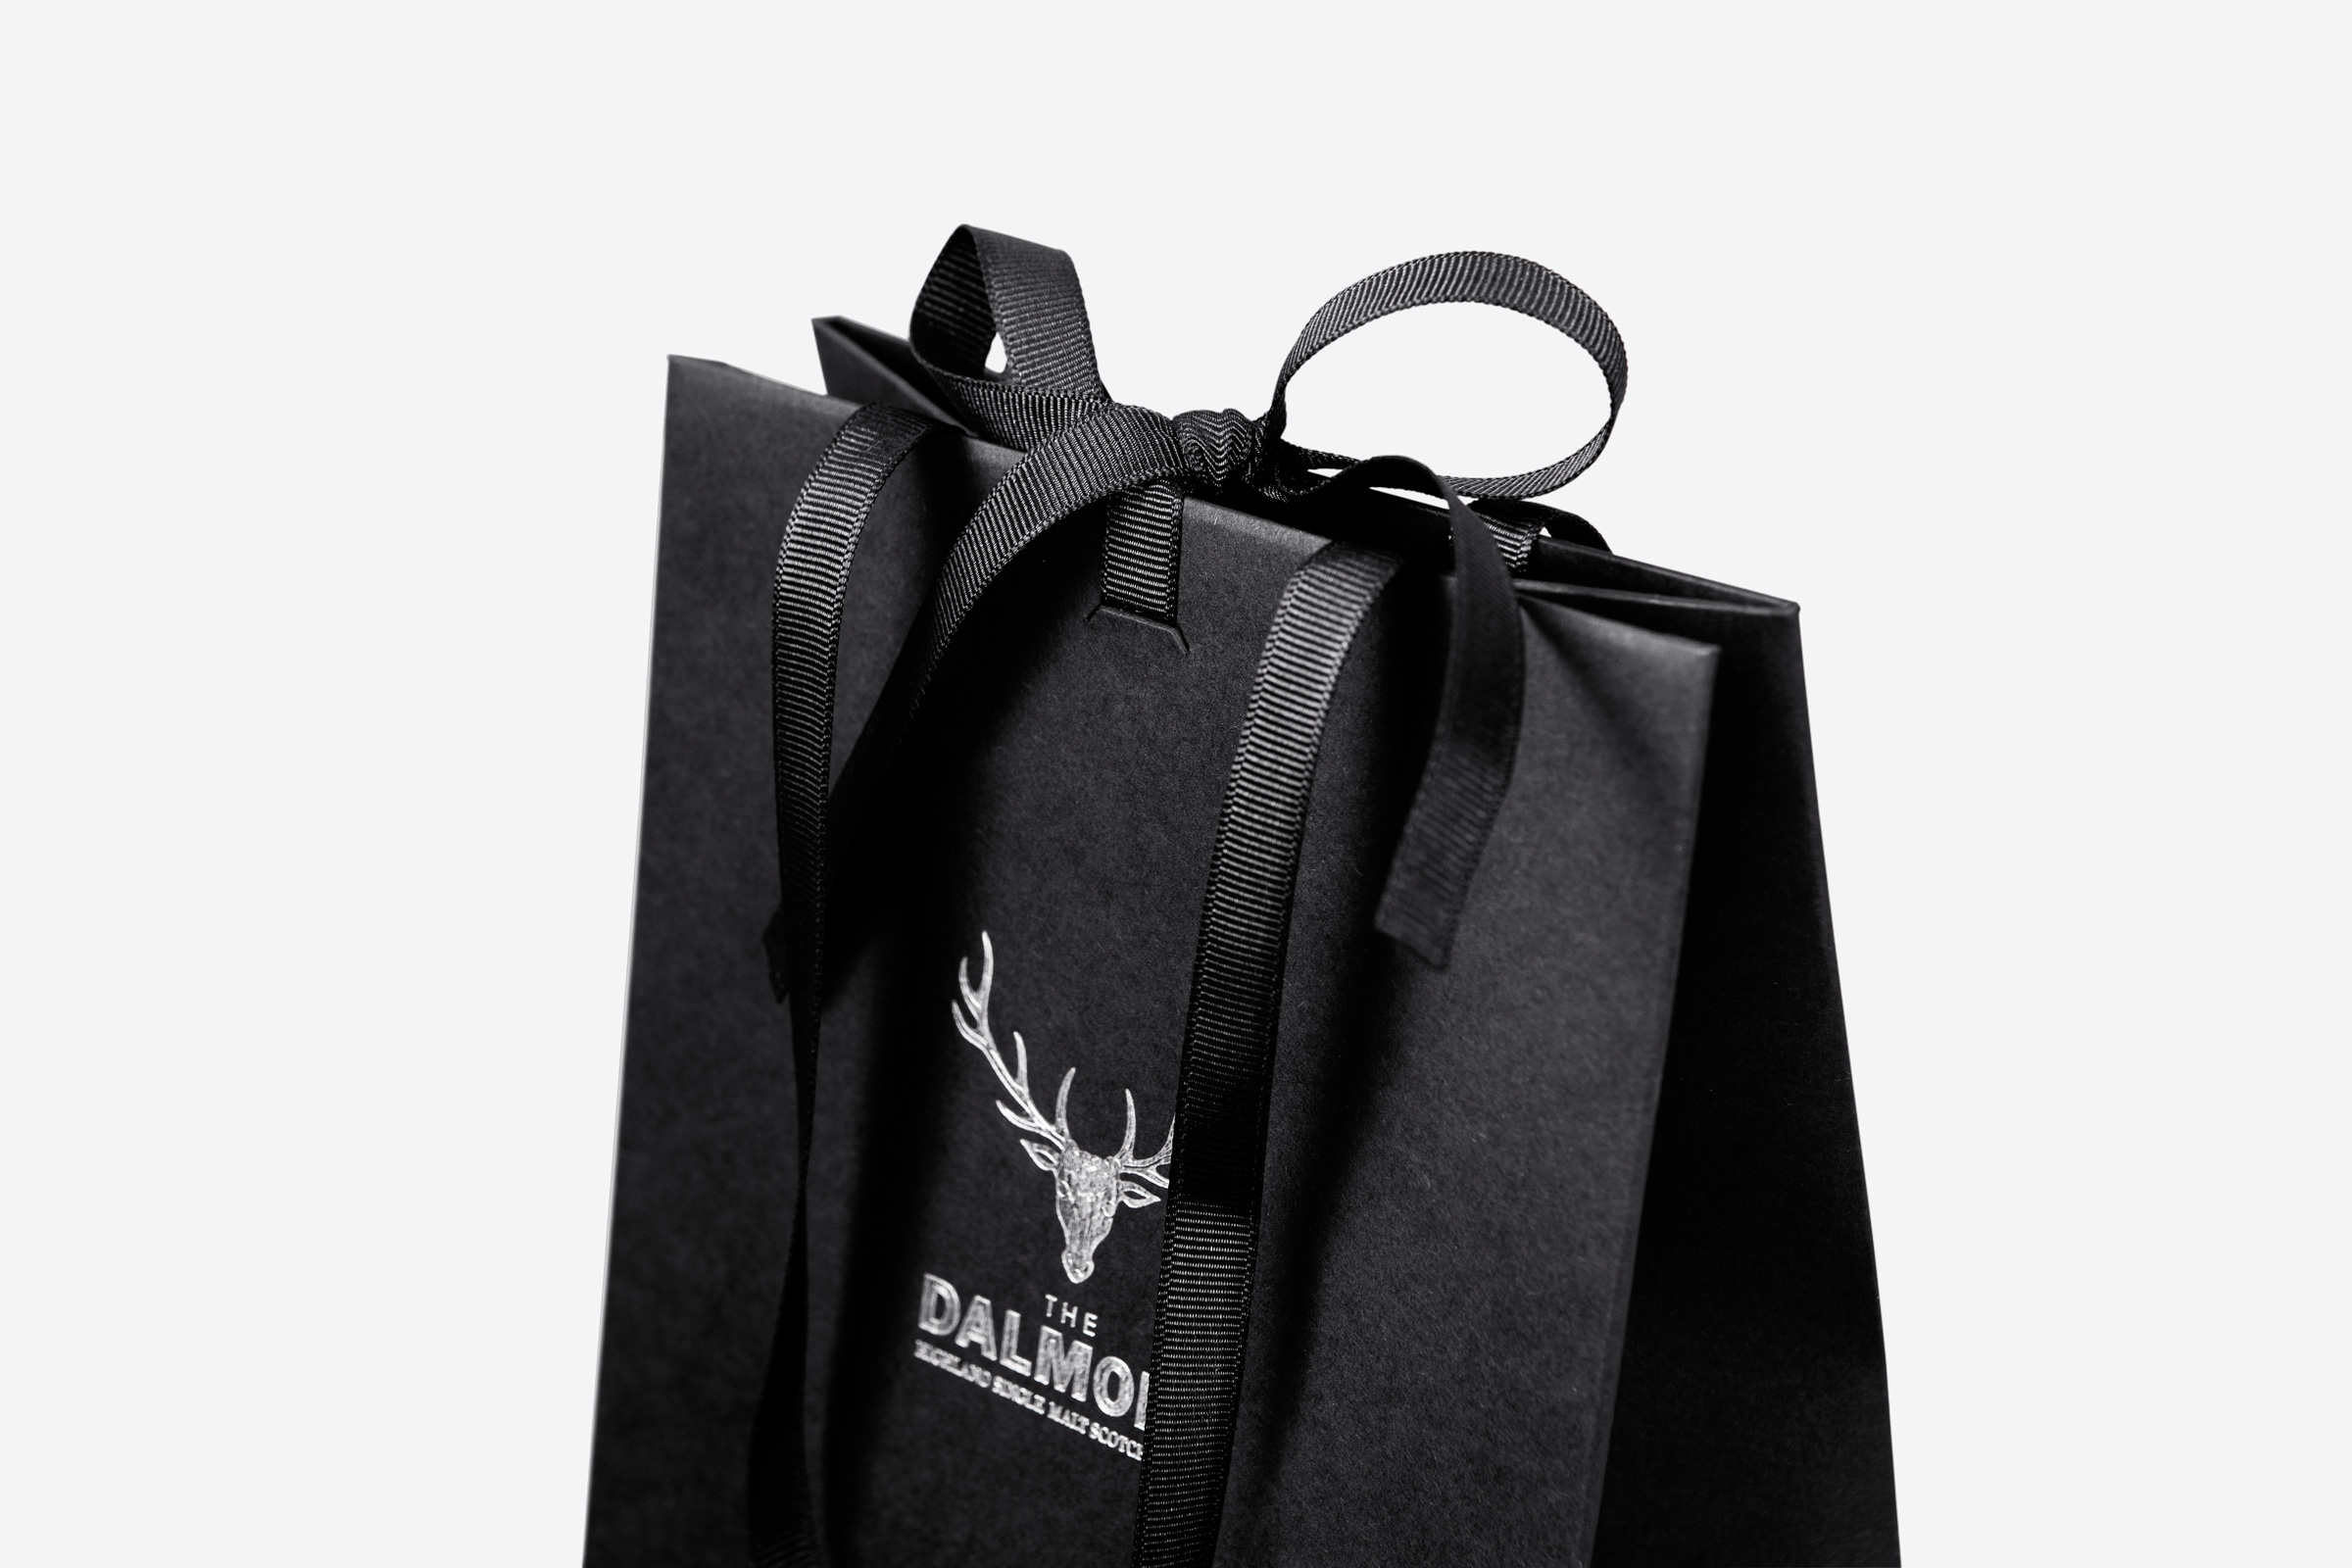 Promotional bag with fabric ribbon handle for liquors the Dalmore